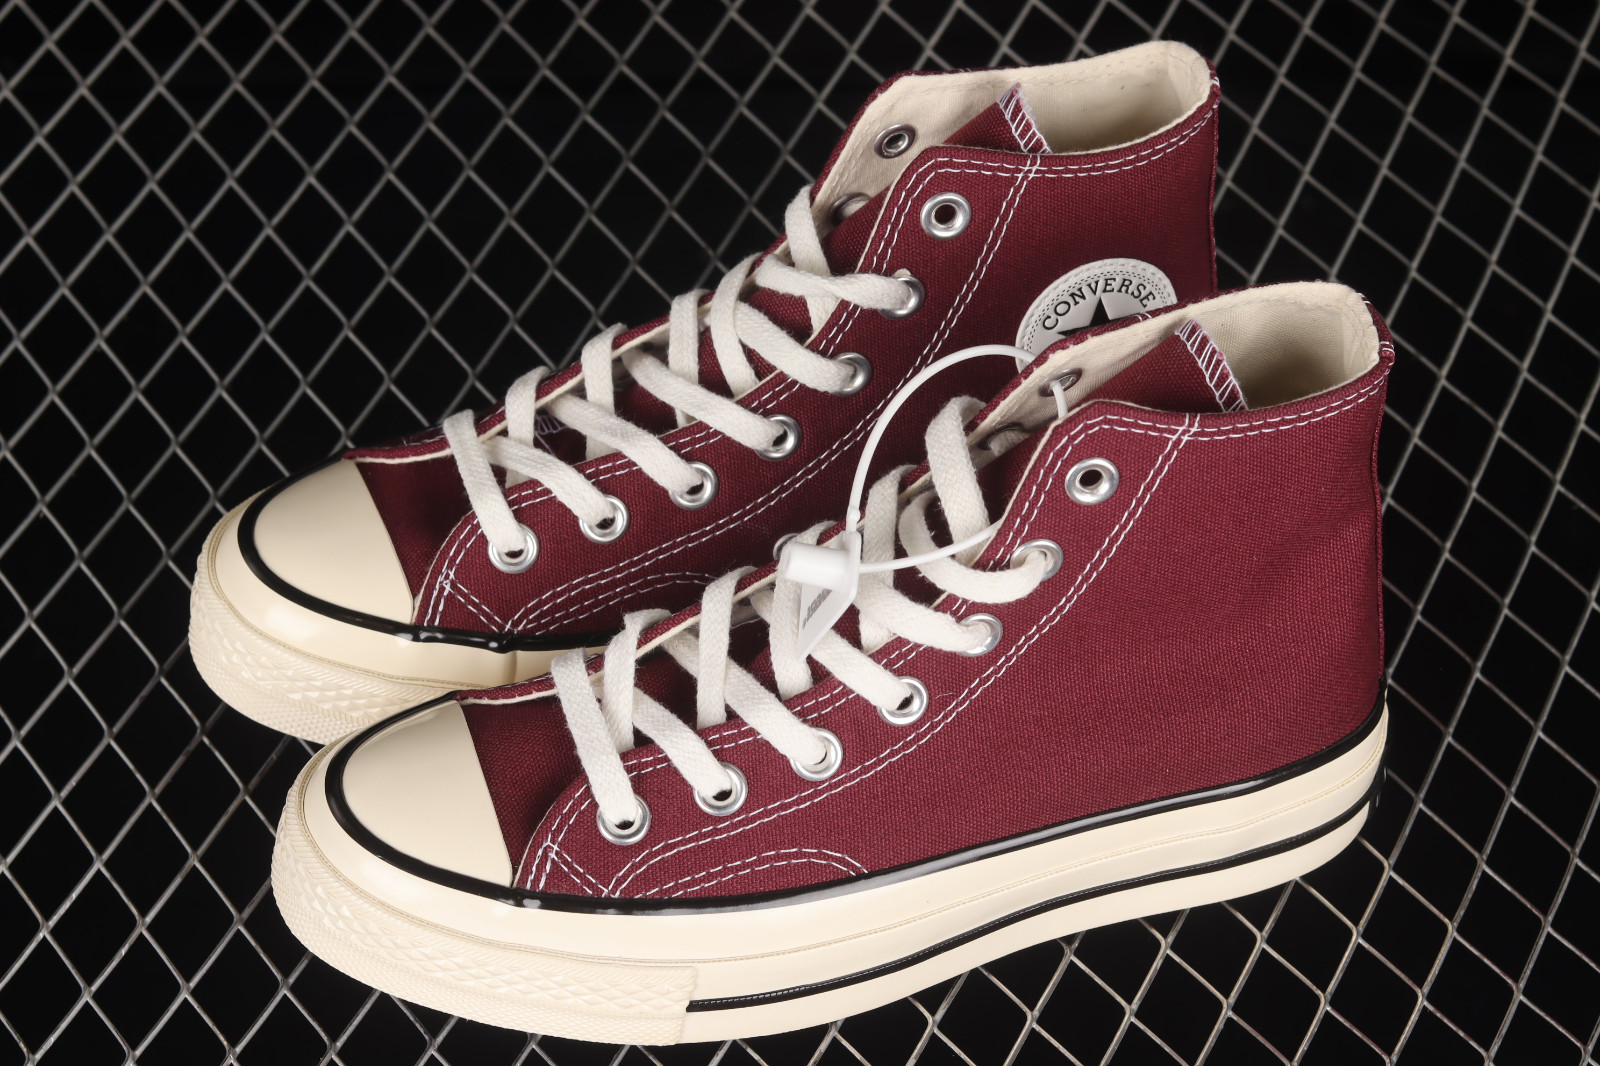 Converse Chuck All Star 70s Hi Recycled Canvas Deep Bordeaux Egret Black 171567C - MultiscaleconsultingShops